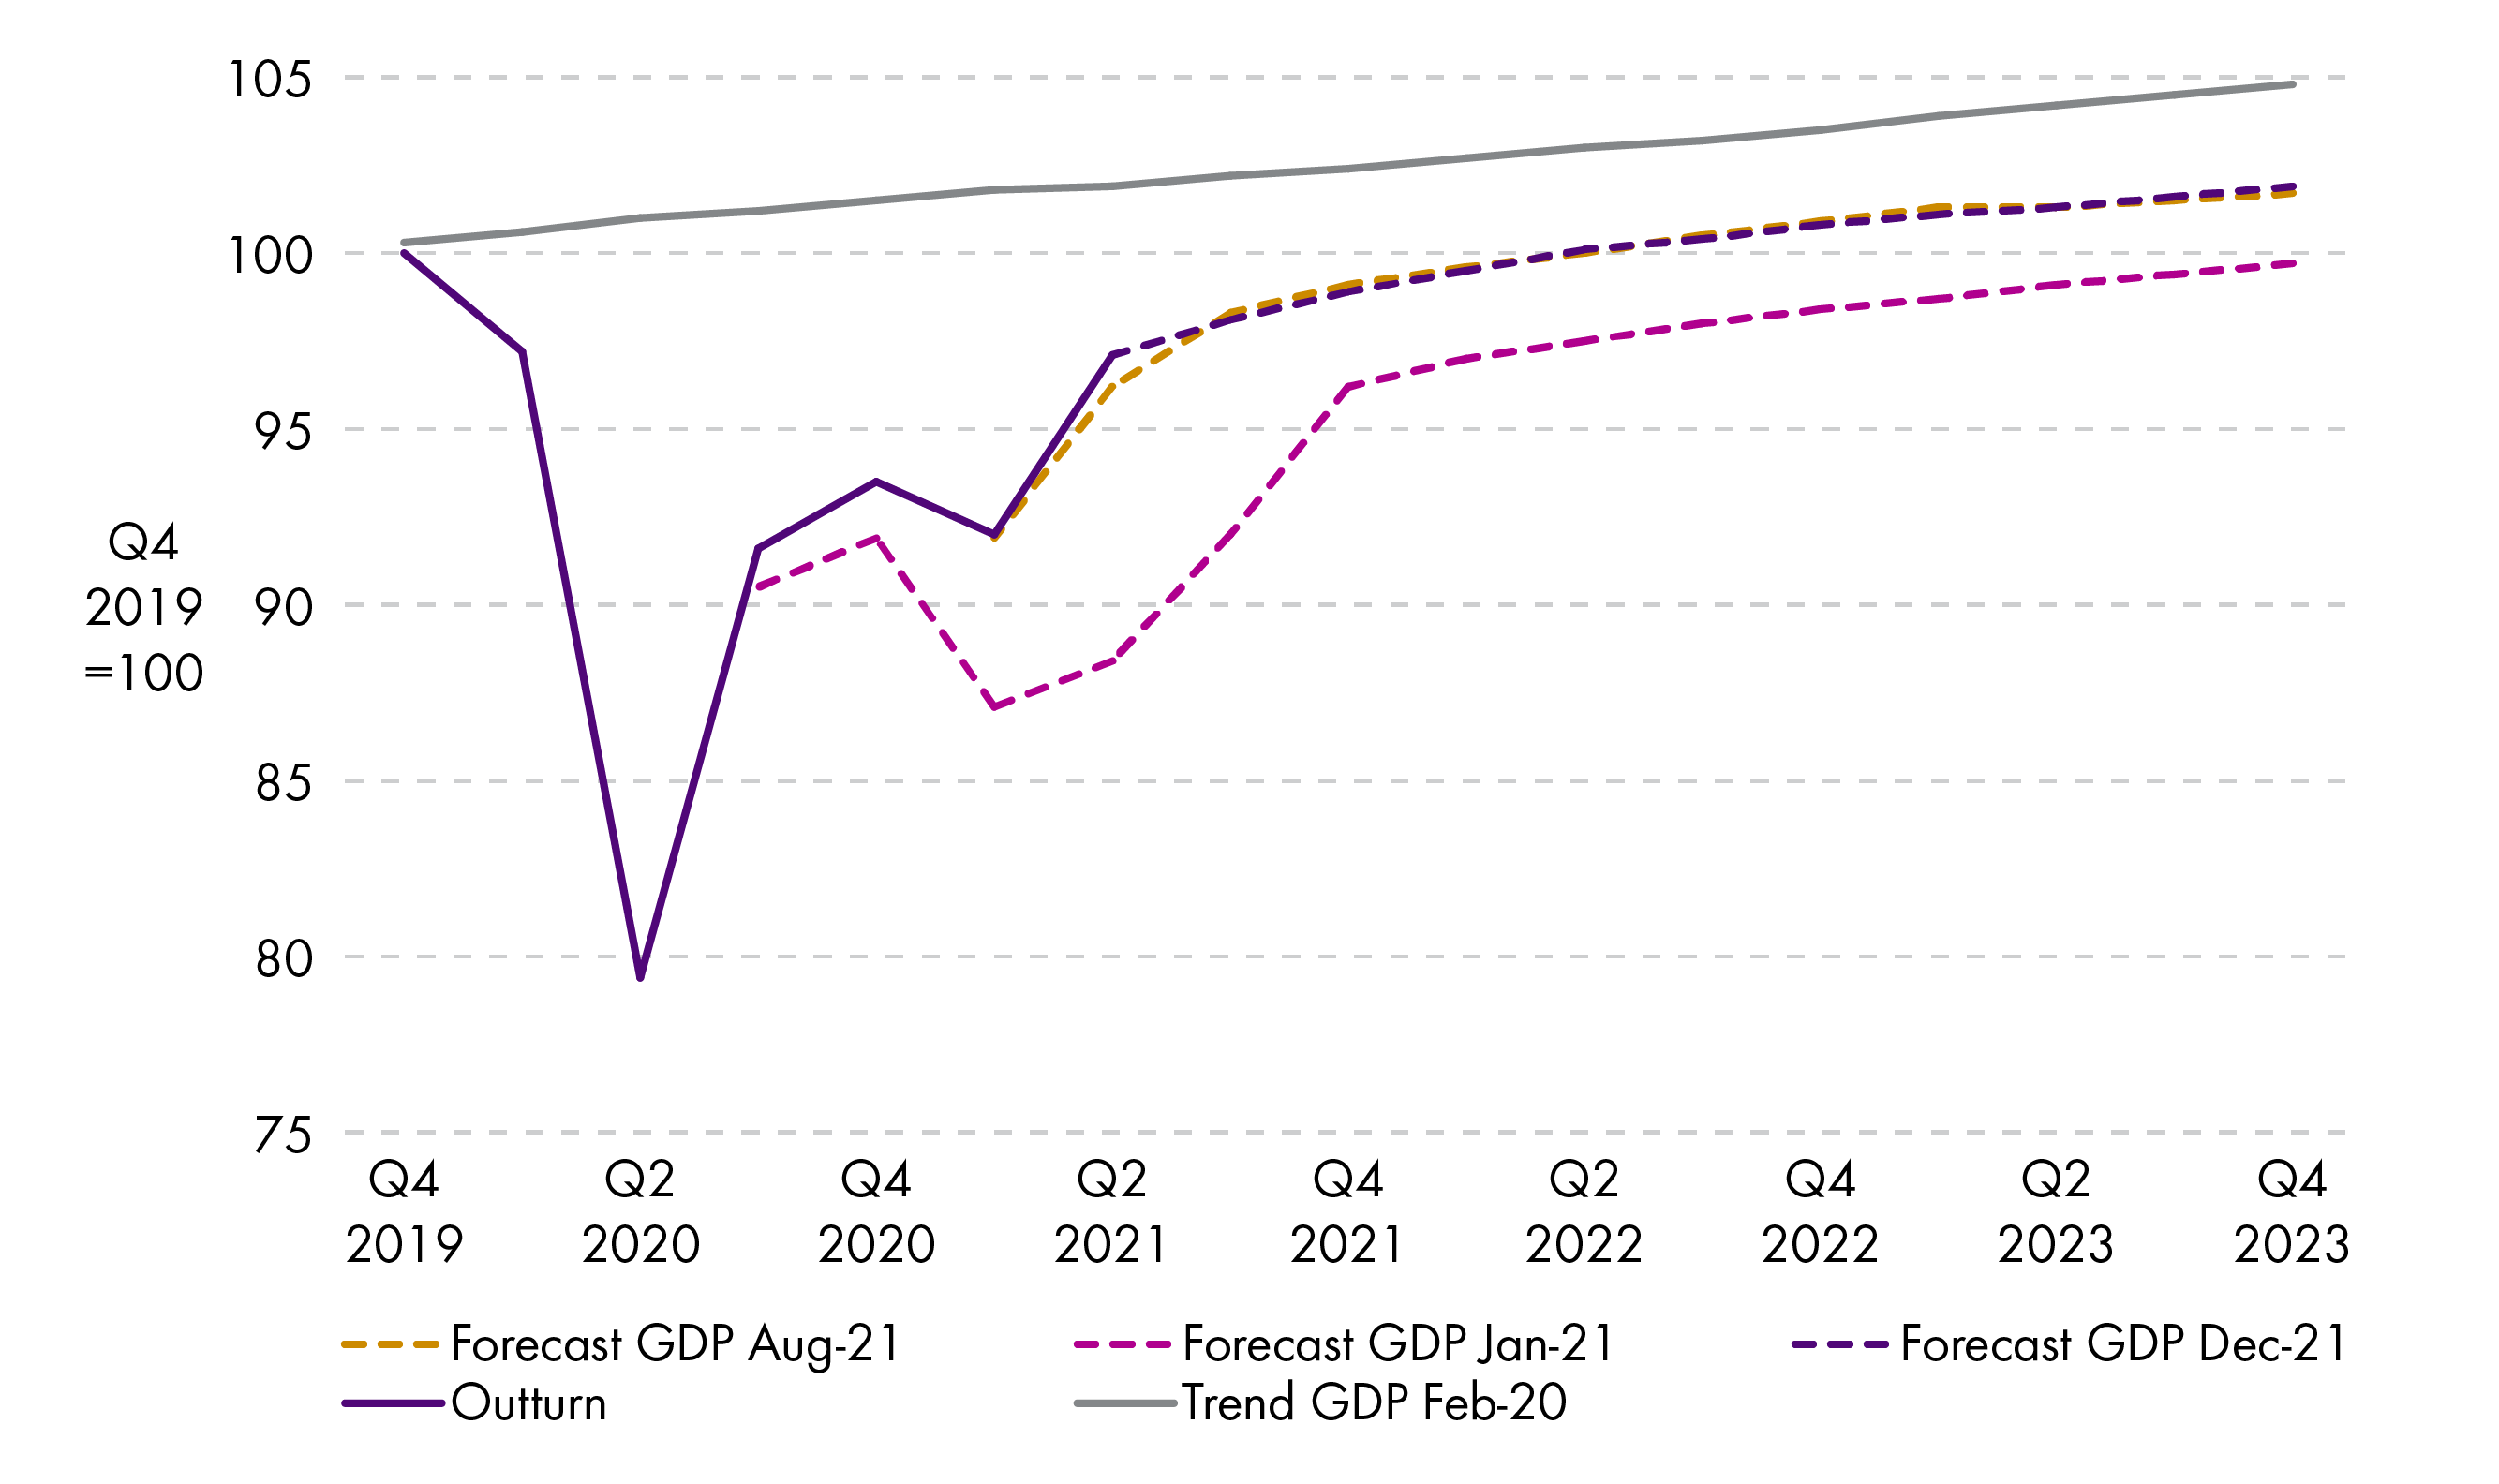 Figure 2 shows three lines representing GDP growth forecasts by quarter made by the SFC in January, August and December 2021. These figures range from actual growth in Quarter 4 2019 to forecasts for quarter 4 in 2023 and shows that the forecasts for GDP growth in December 2021 compared with those made in January 2021 are much improved. The forecasts made in August and then December 2021 are very closely aligned.